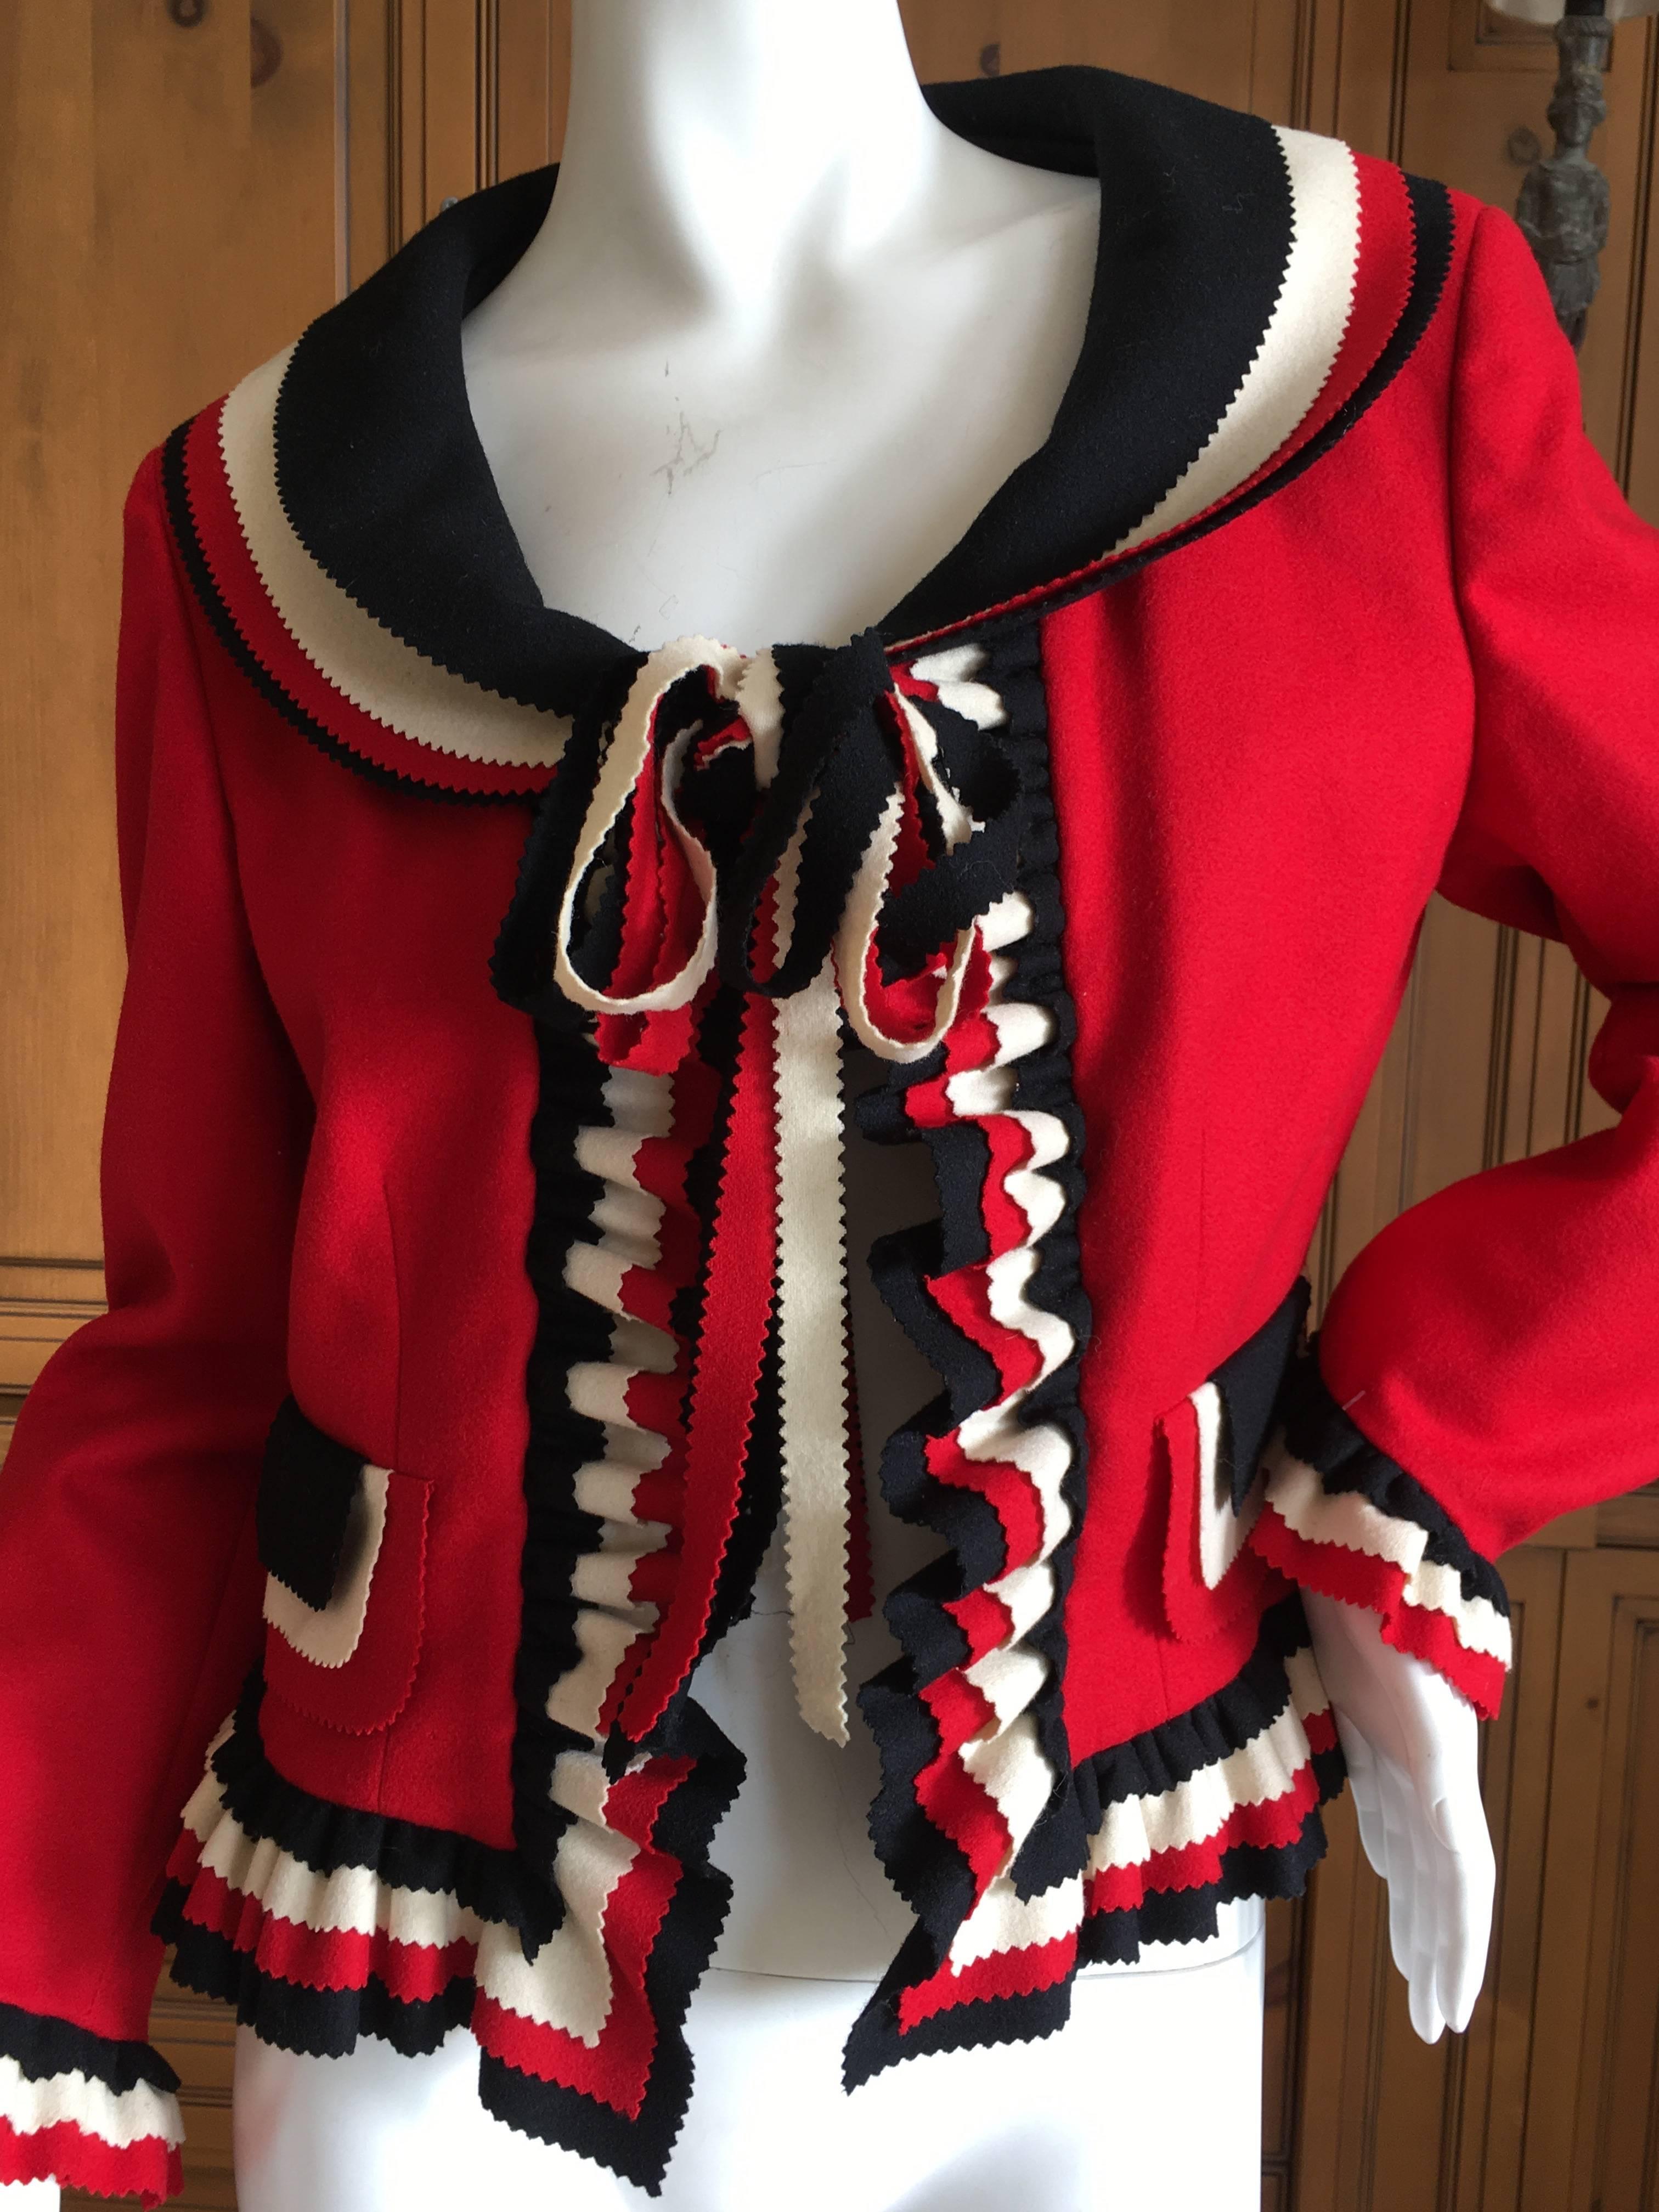 Wonderful red ruffled wool jacket from Moschino from the 1993 collecton fro Cheap and Chic.
Contrasting red, white and black with ribbon trim ties at the neck.
Underarm stains on lining
Bust 38"
Waist 32"
Length 21"
